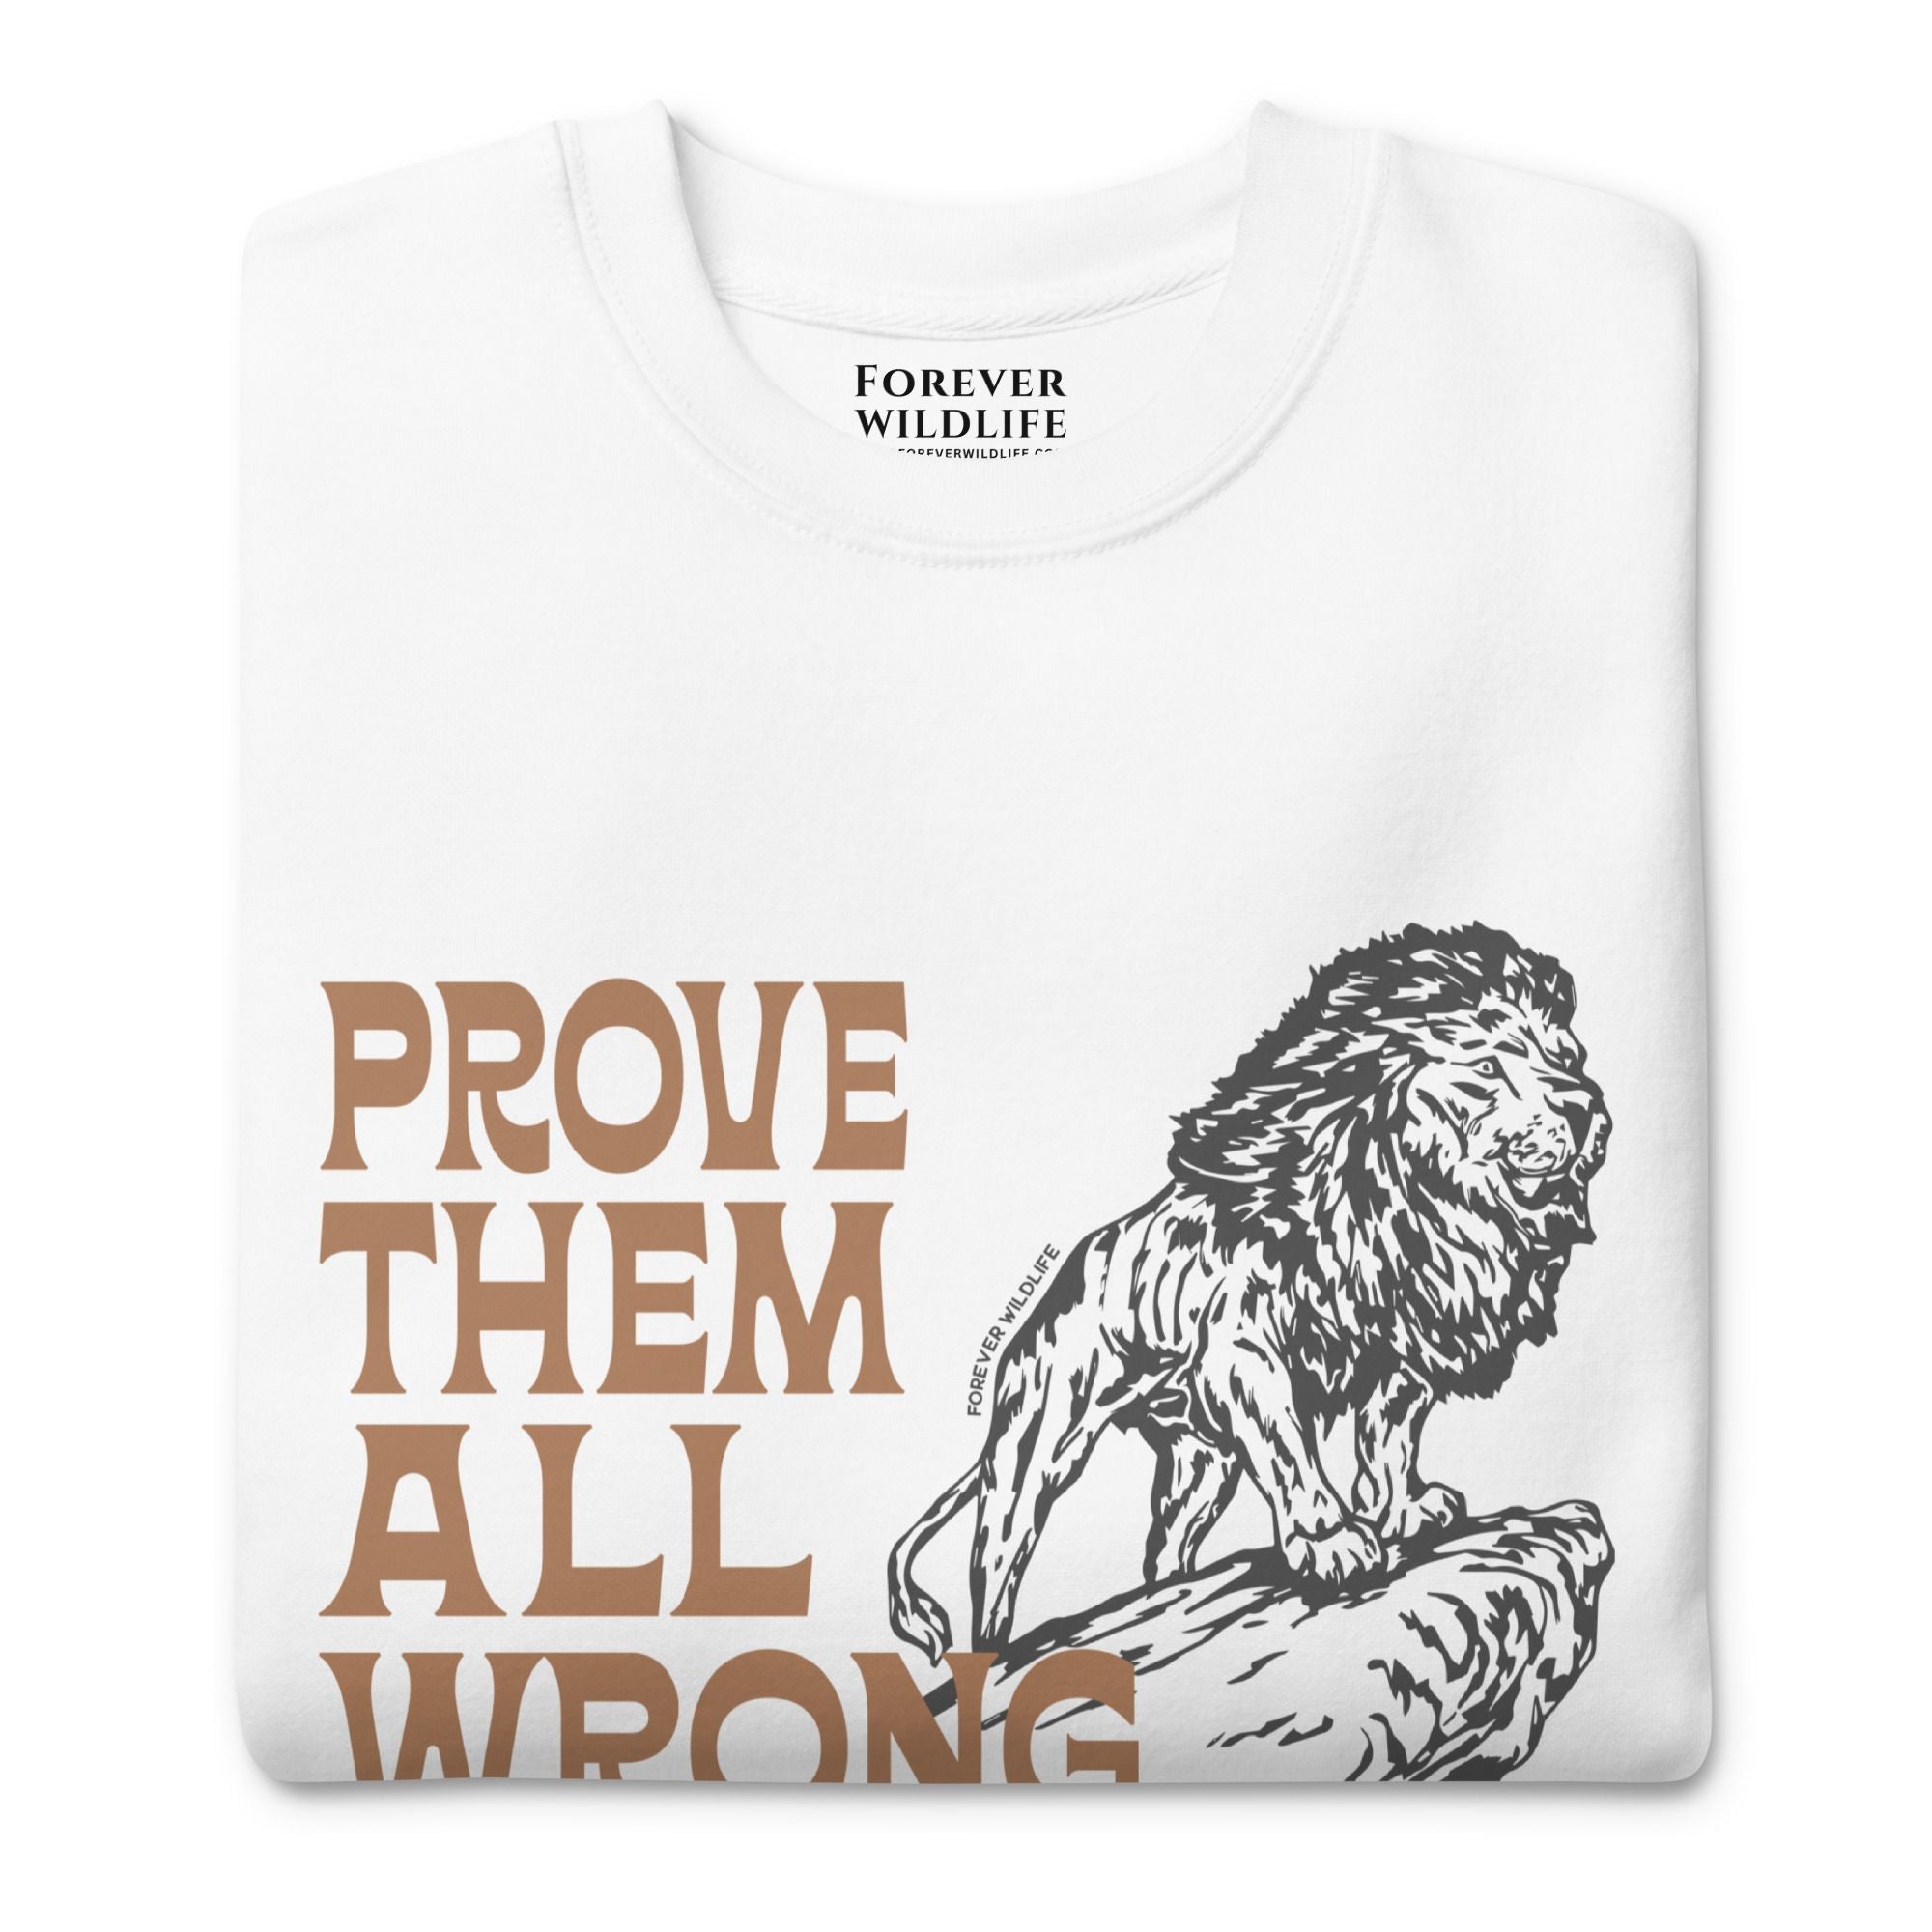 Lion Sweatshirt in White-Premium Wildlife Animal Inspiration Sweatshirt Design with 'Prove Them All Wrong About You' text, part of Wildlife Sweatshirts & Clothing from Forever Wildlife.